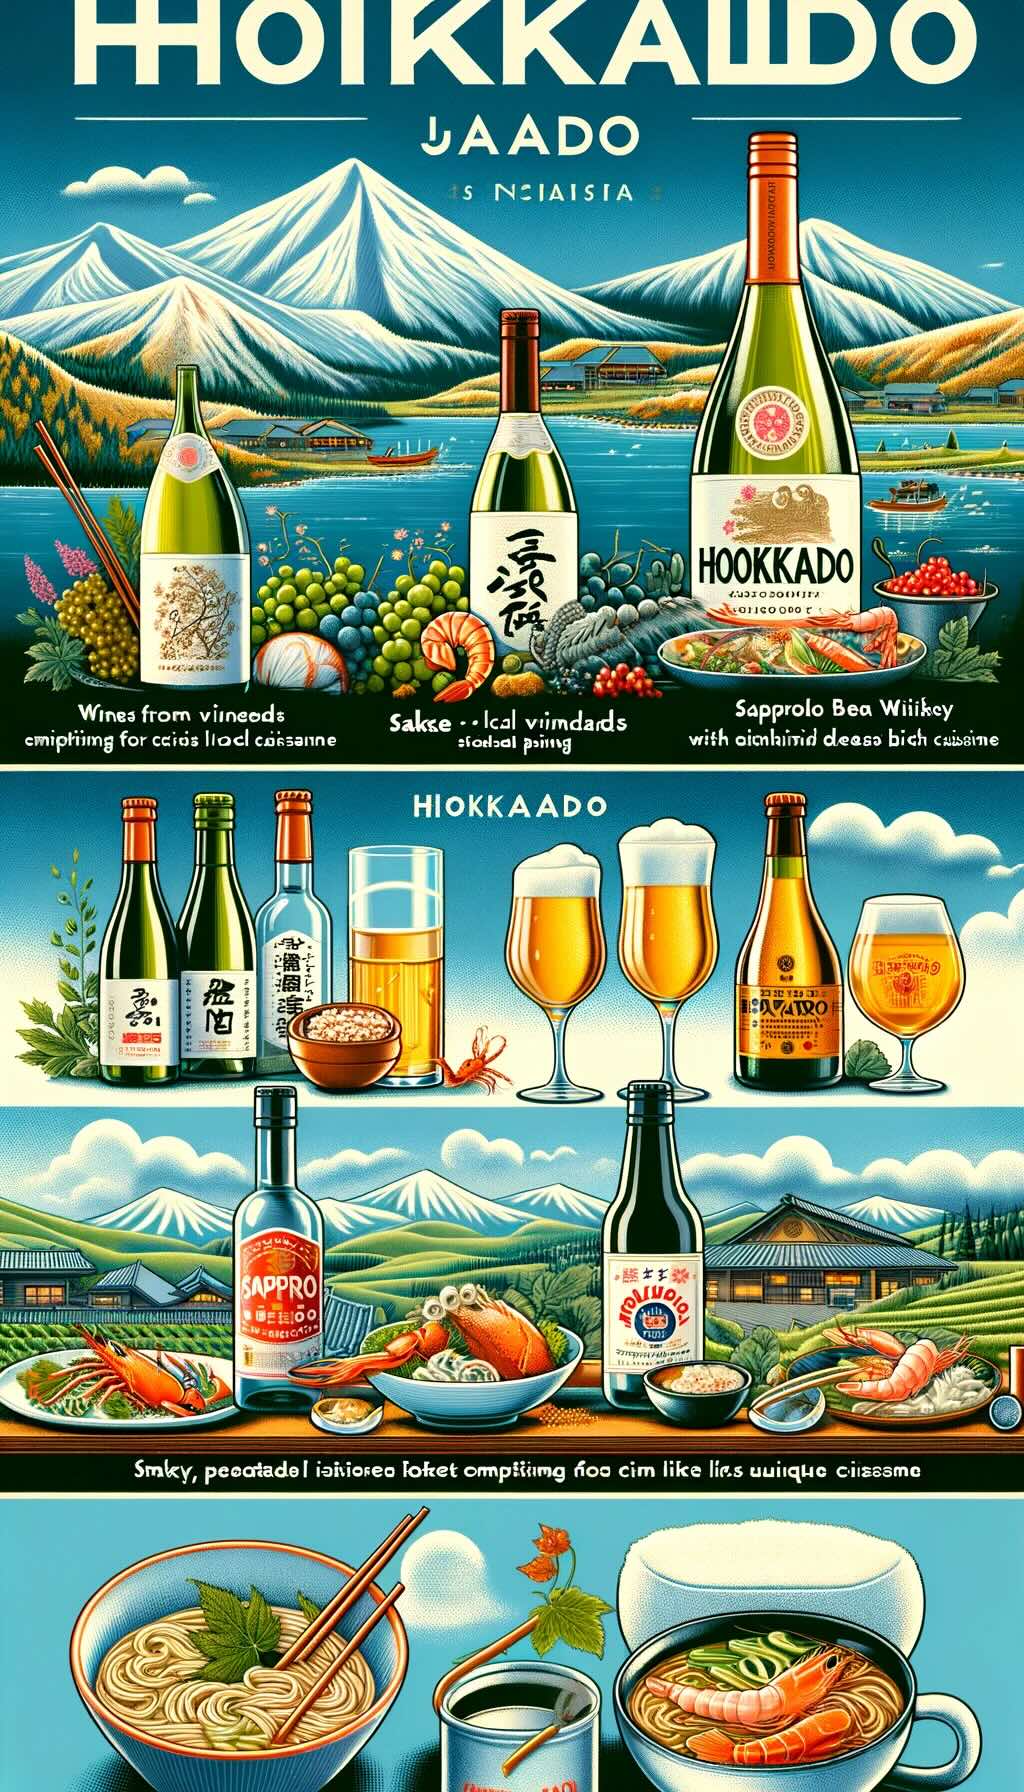 Diverse drinks palette of Hokkaido, Japan's northernmost island, and how they complement the island's unique cuisine captures the essence of Hokkaido's beverages in a setting that reflects its cooler climate and natural beauty